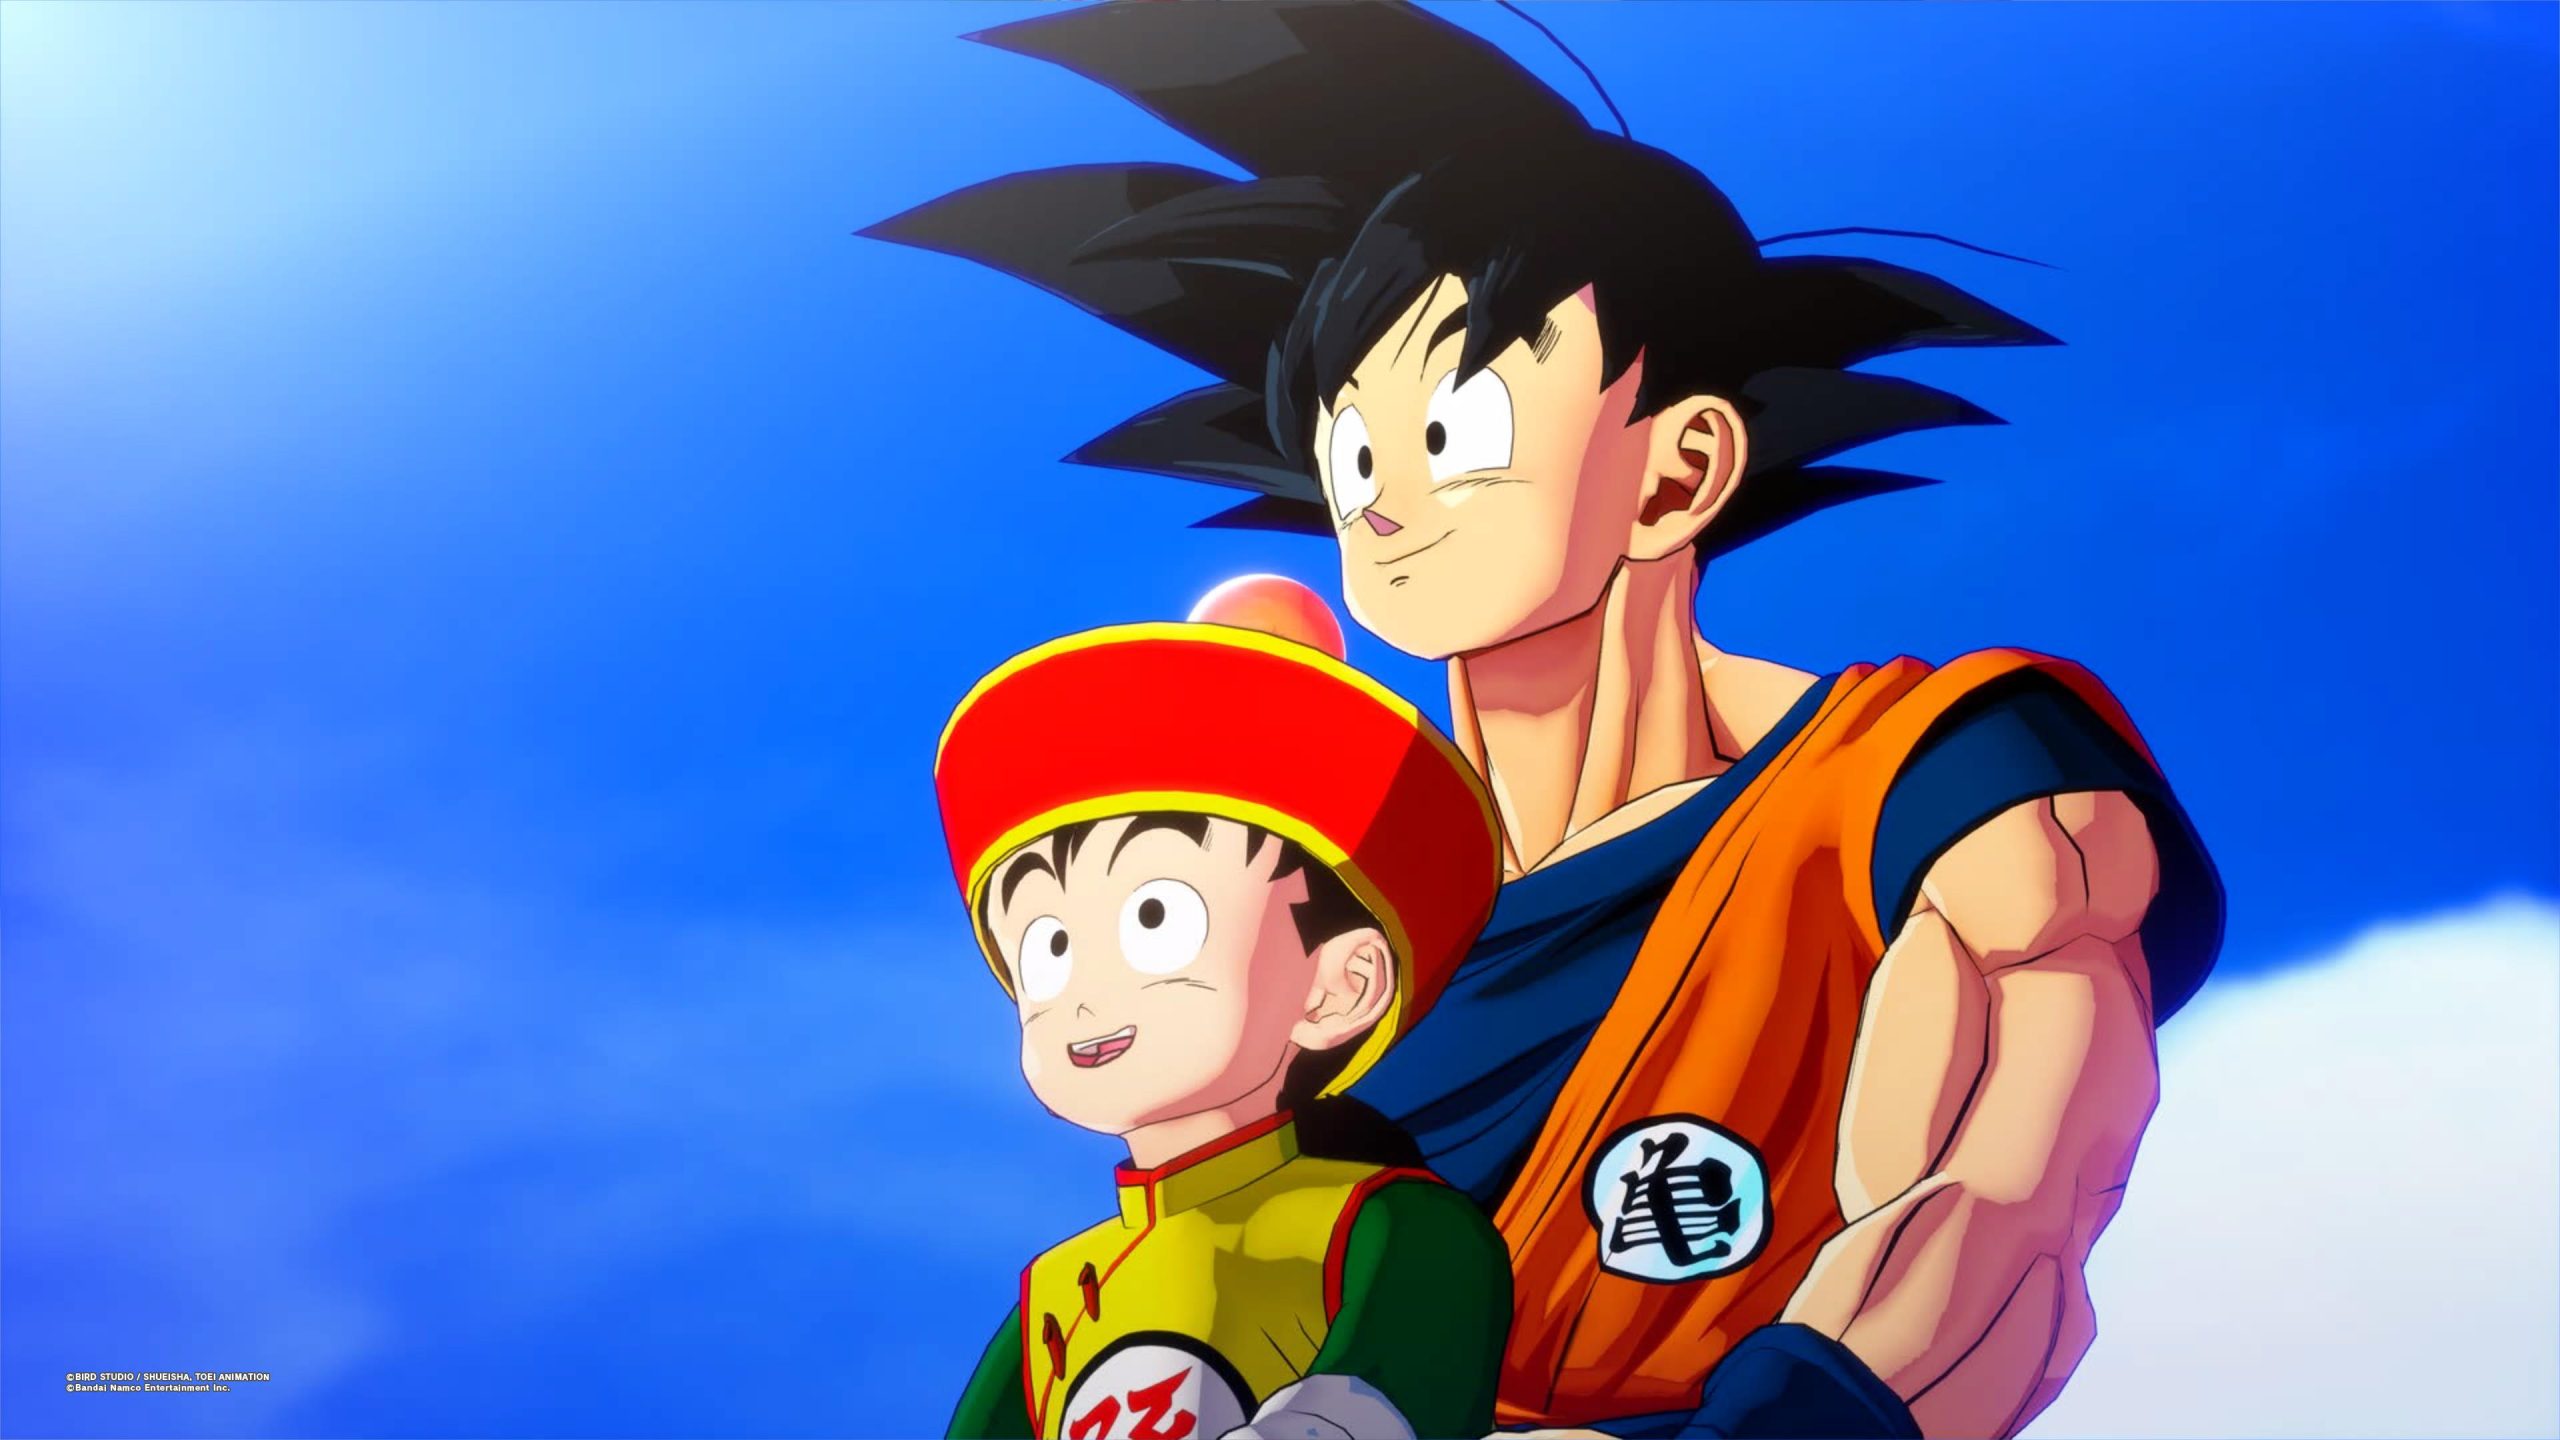 Discovering Anime Adventures A Comprehensive Guide for Fans Craving Dragon Ball Z Excitement